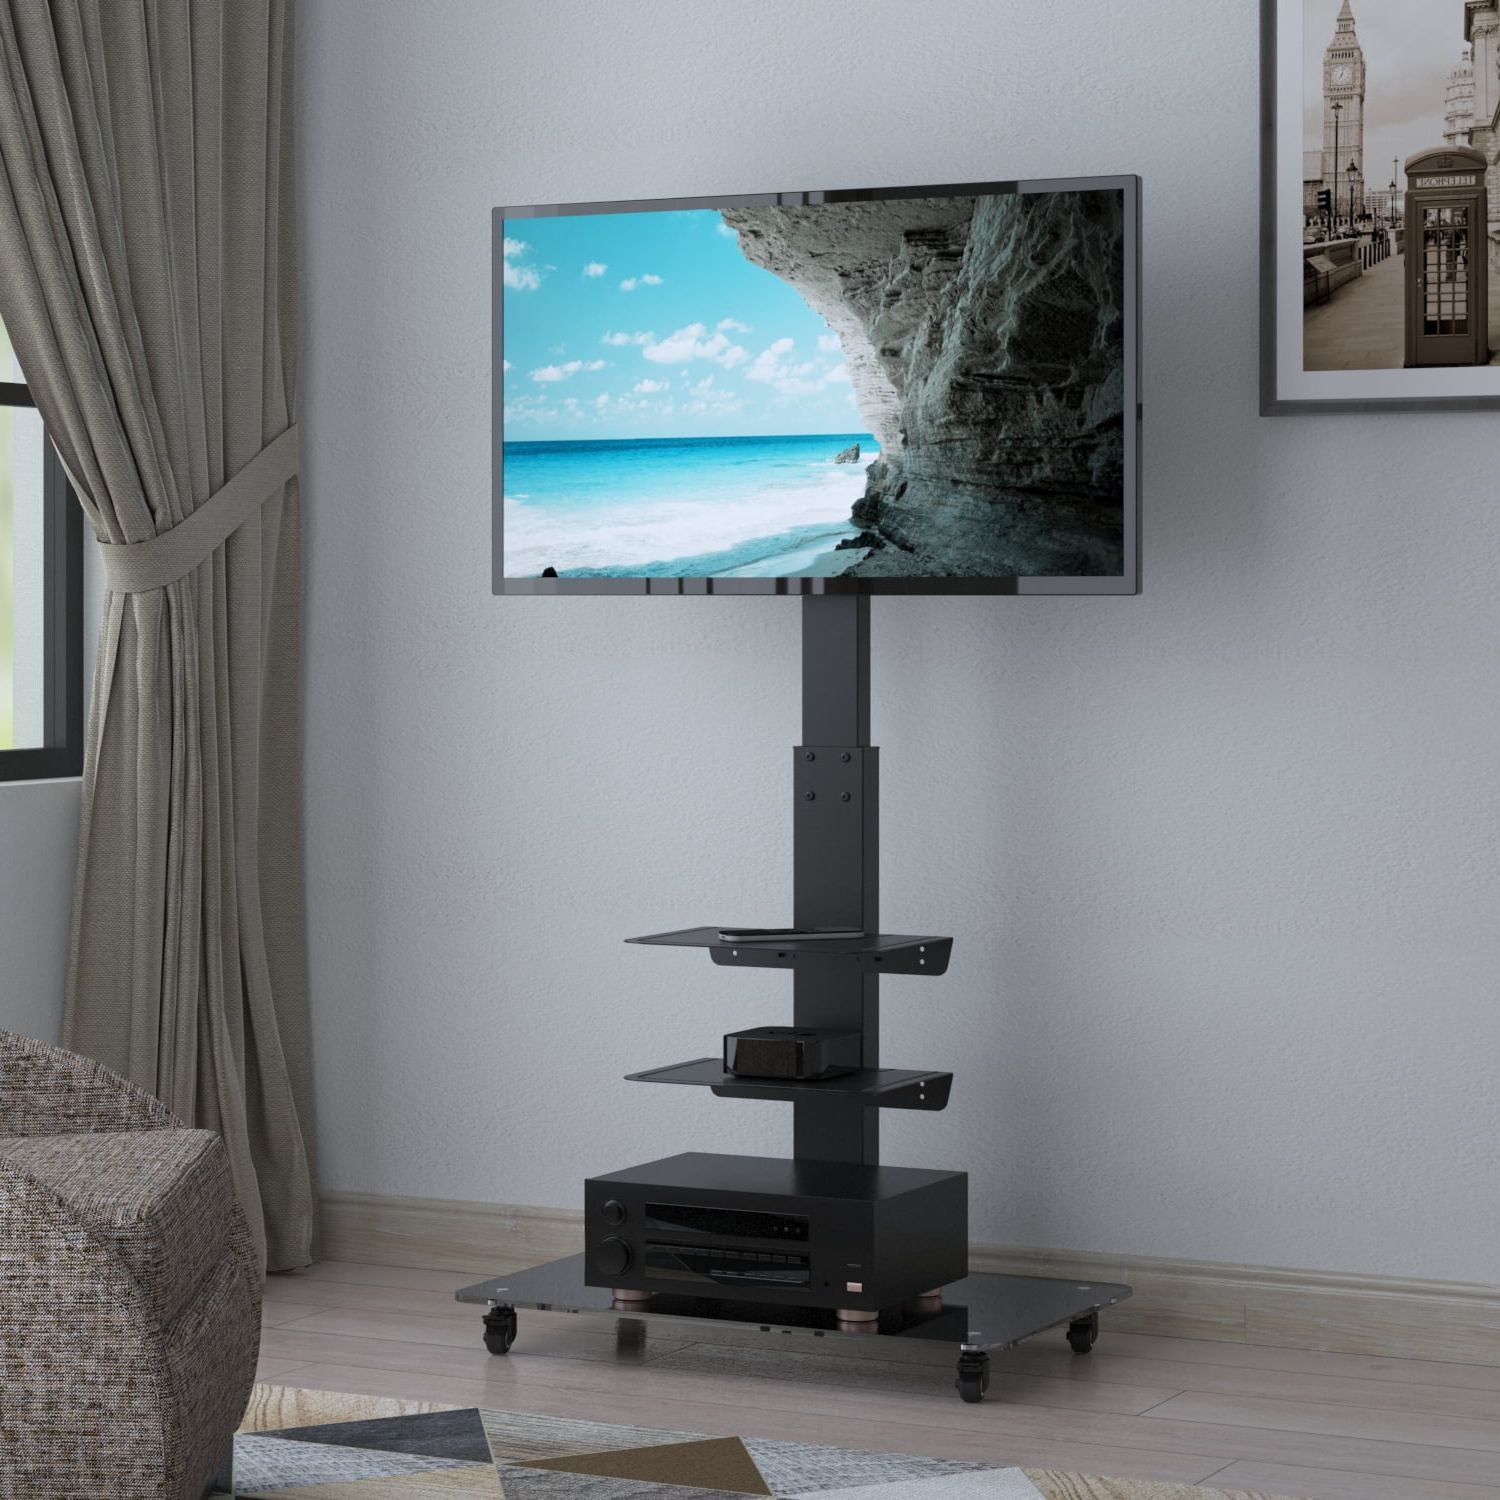 Yomt Modern Rolling Floor Tv Stand For 32 To 65 Inch India | Ubuy Intended For Modern Rolling Tv Stands (Gallery 7 of 20)